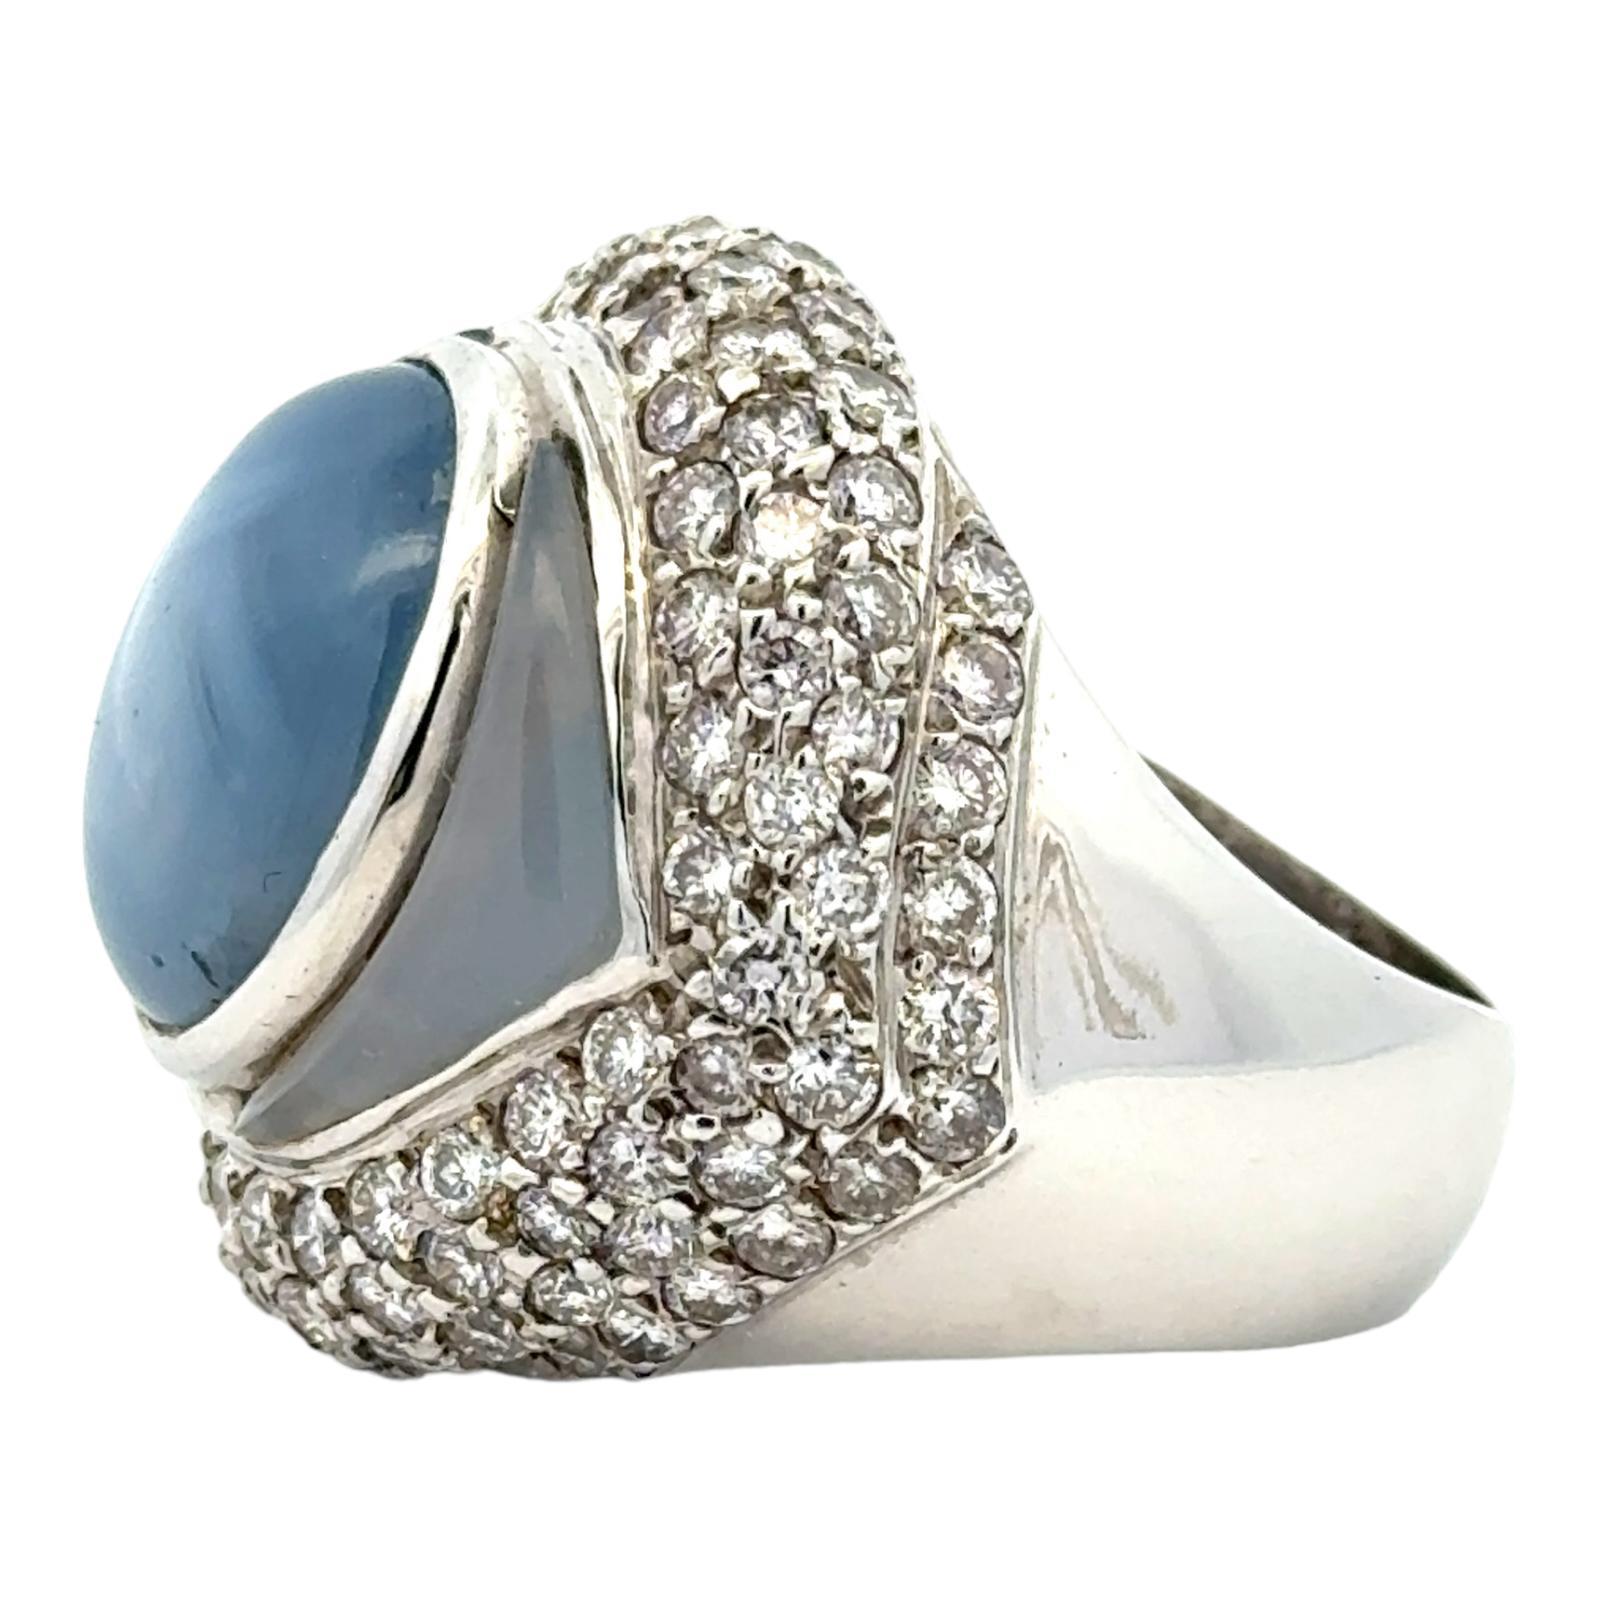 Cabochon No Heat Natural Blue Star Sapphire Diamond 18K White Gold Cocktail Ring GIA Cert For Sale